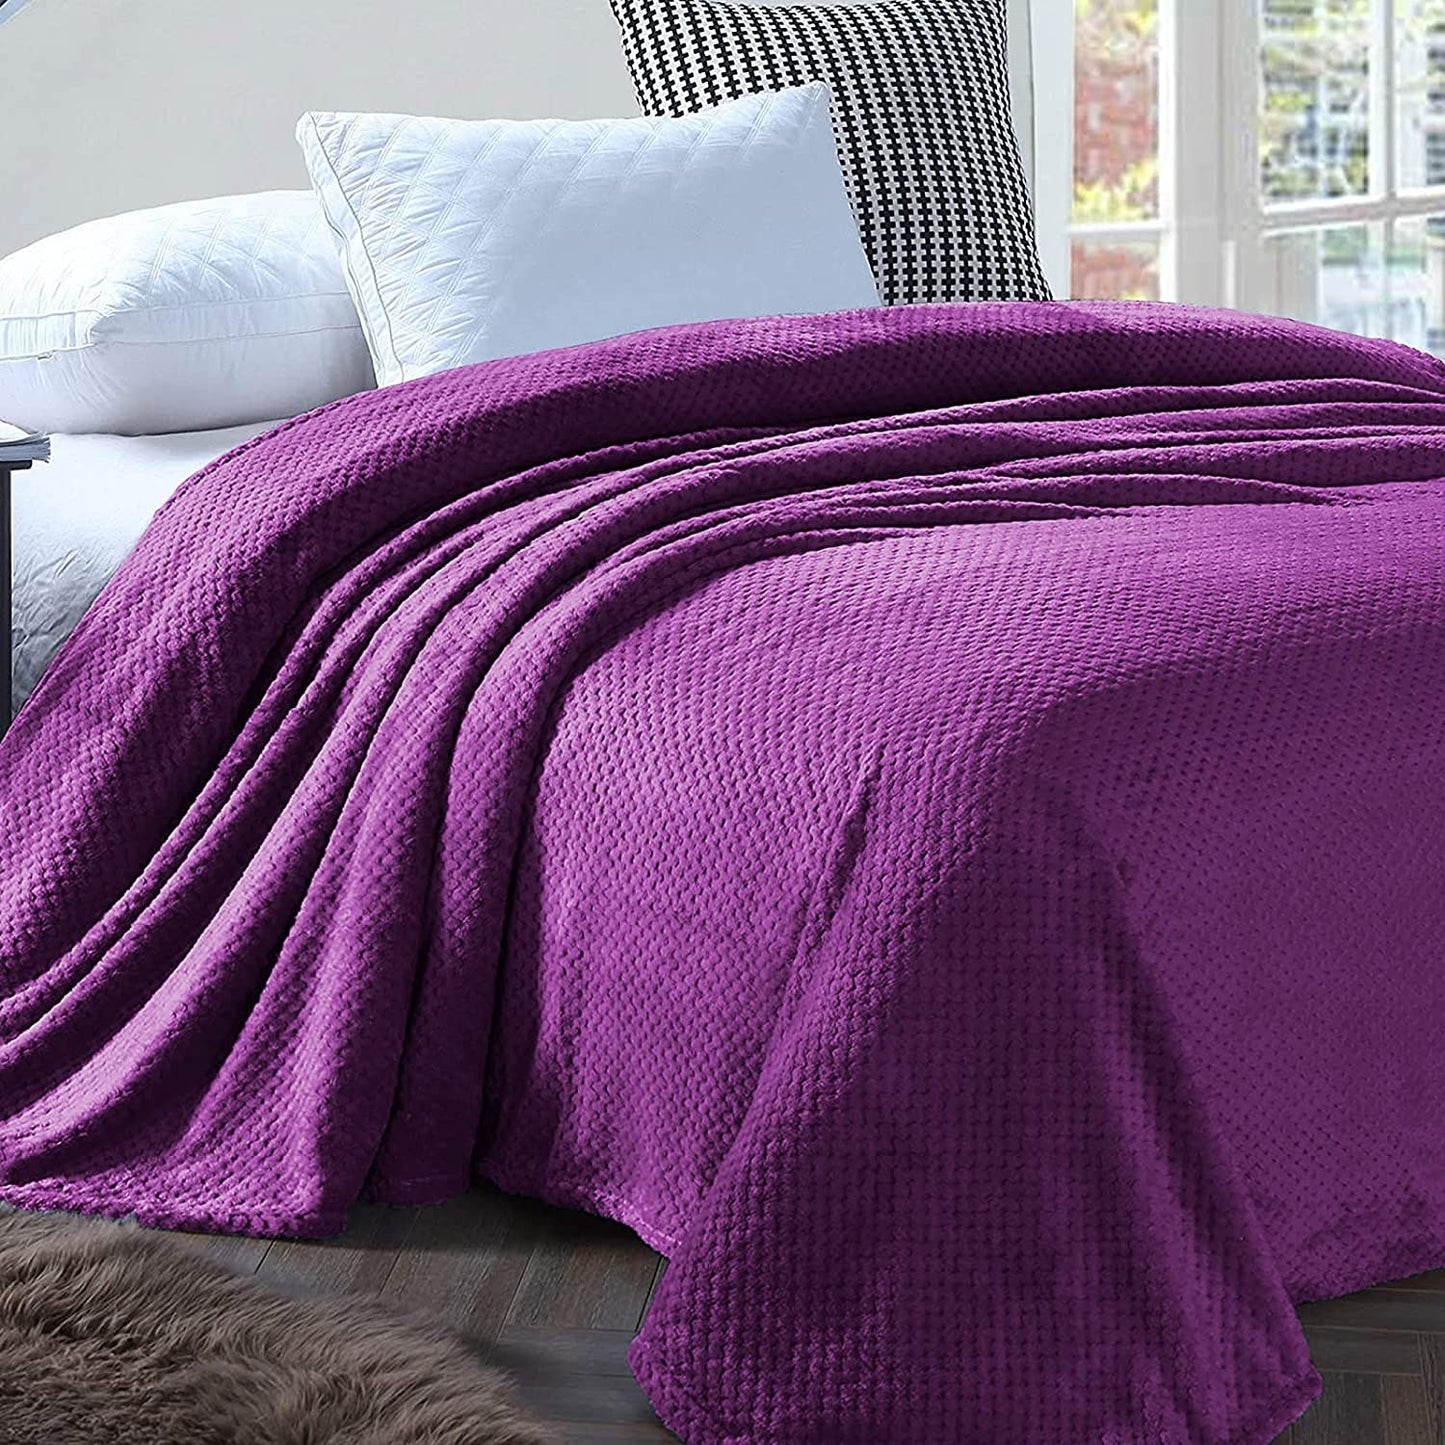 Exclusivo Mezcla Waffle Textured Soft Fleece Blanket, King Size Bed Blanket, Cozy Warm and Lightweight (Purple, 90x104 inches)